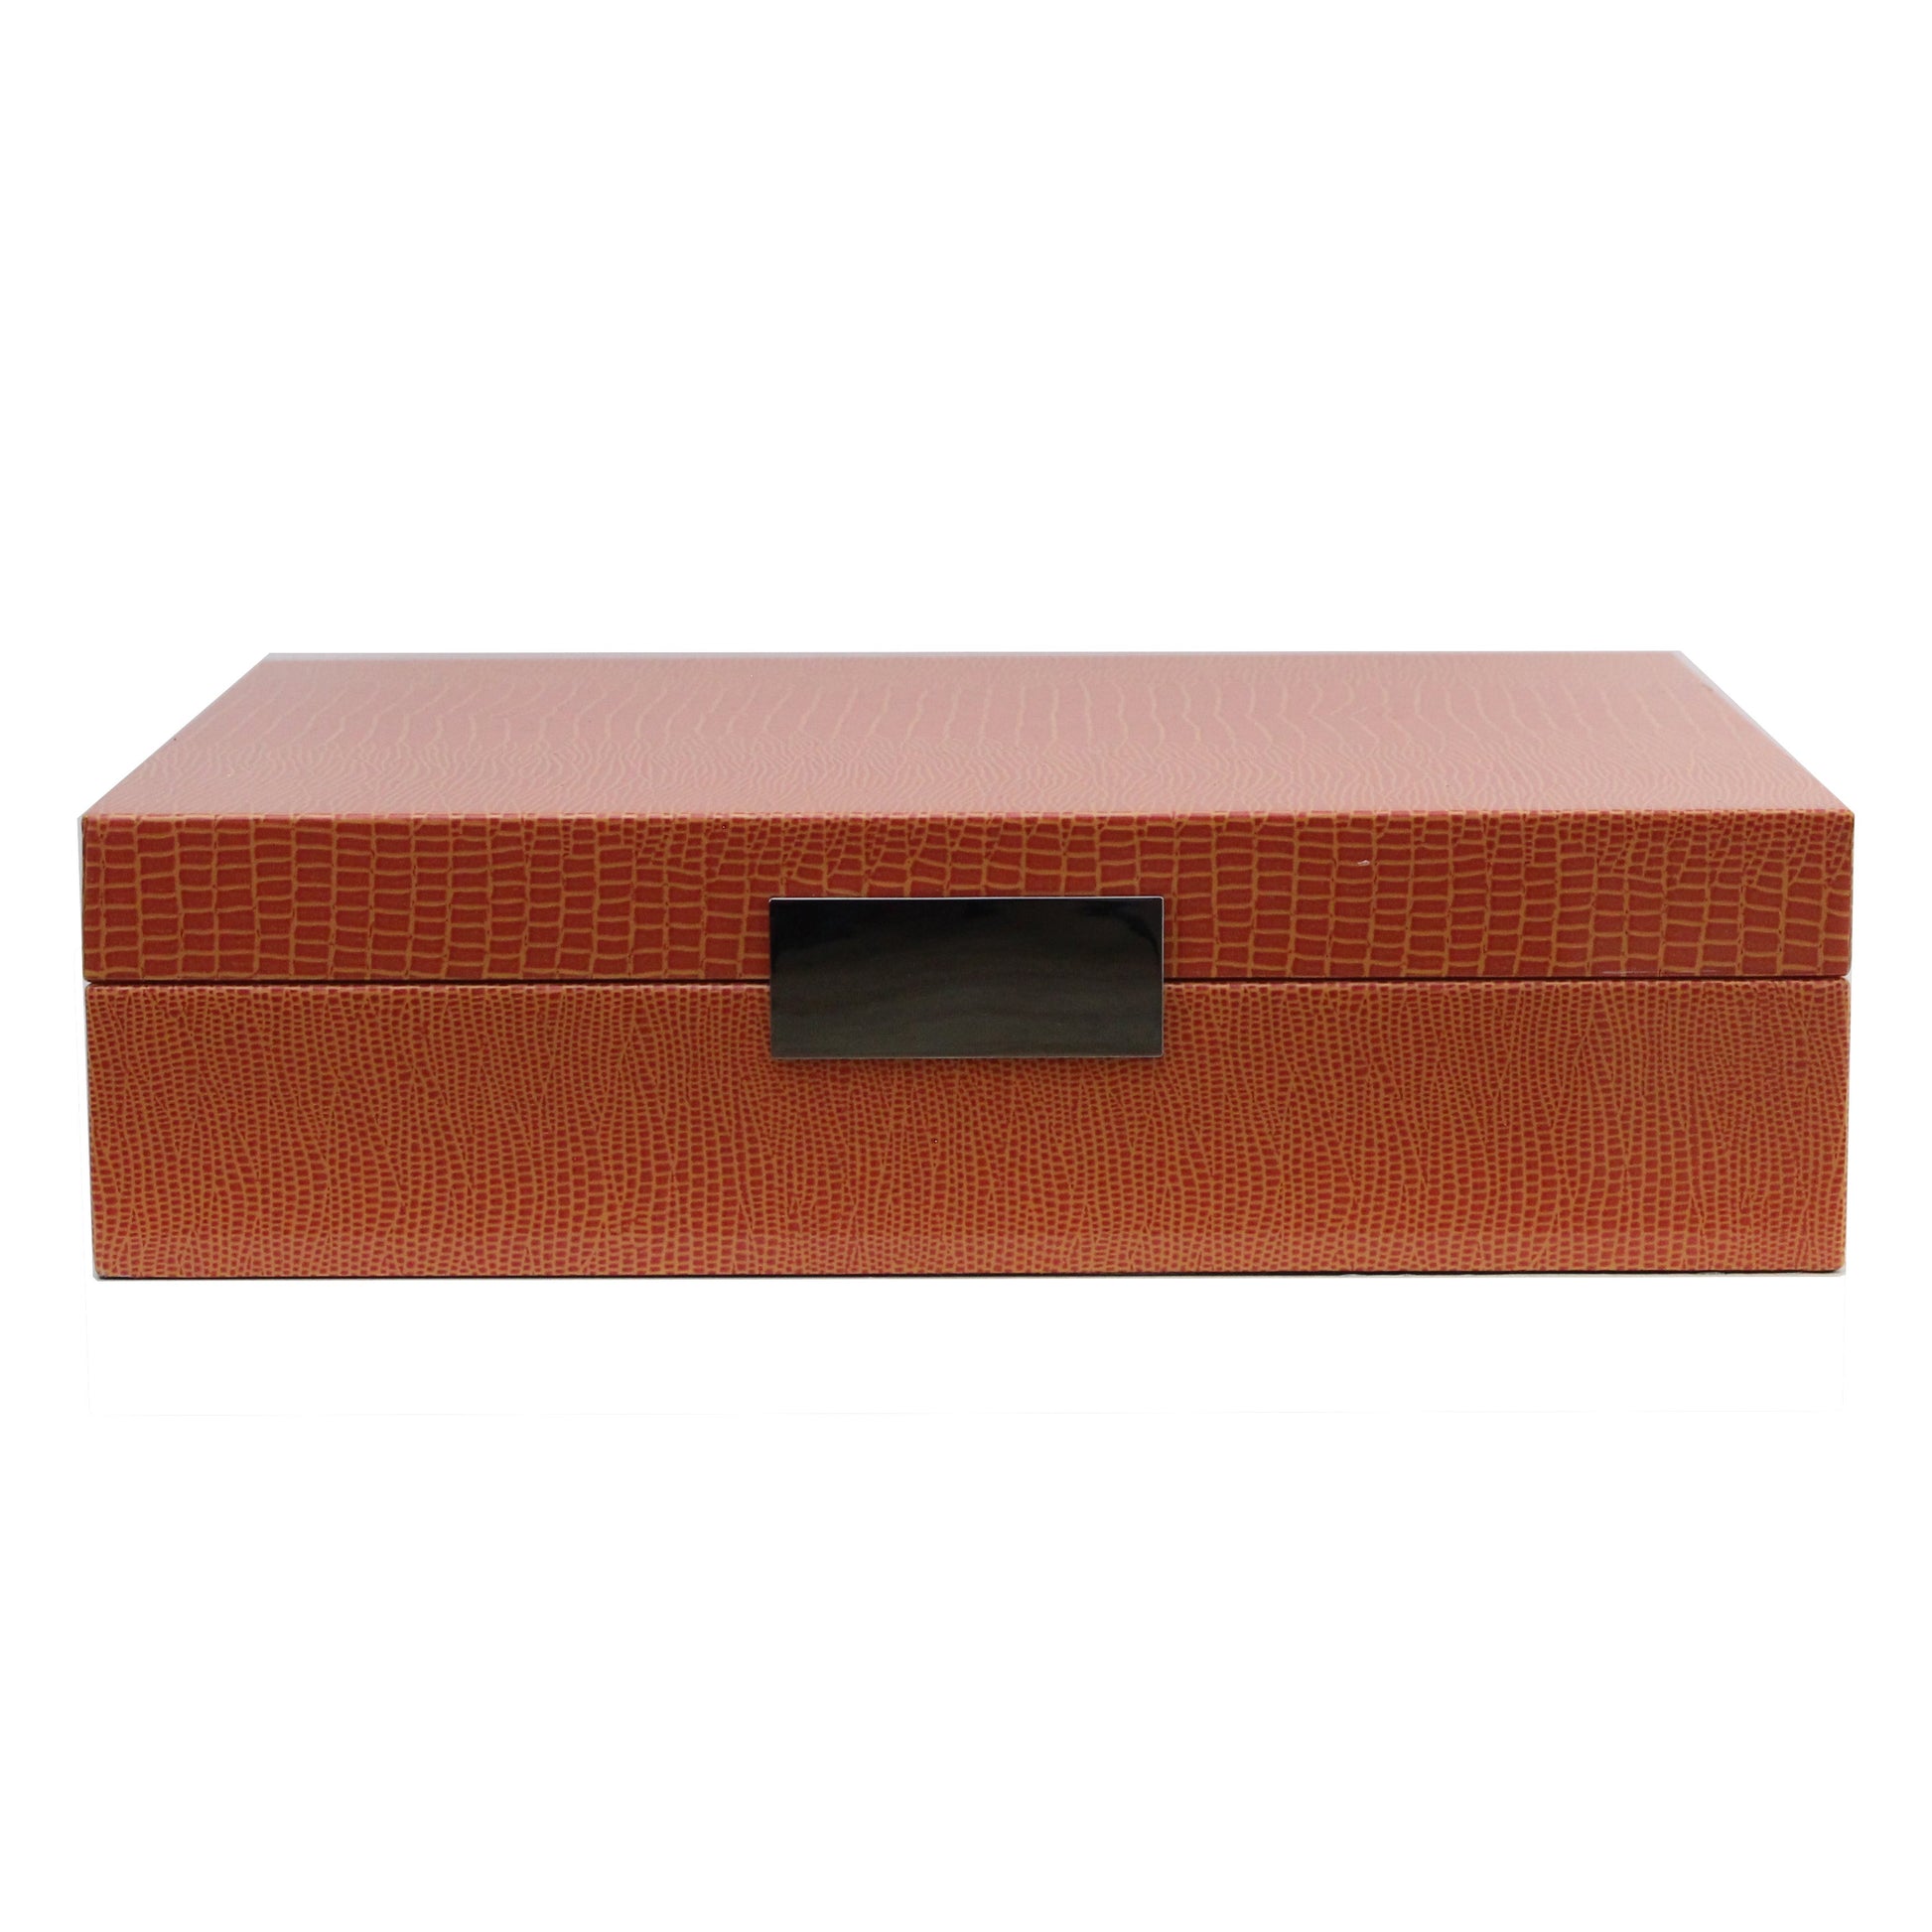 Large orange storage box with silver plated clasp